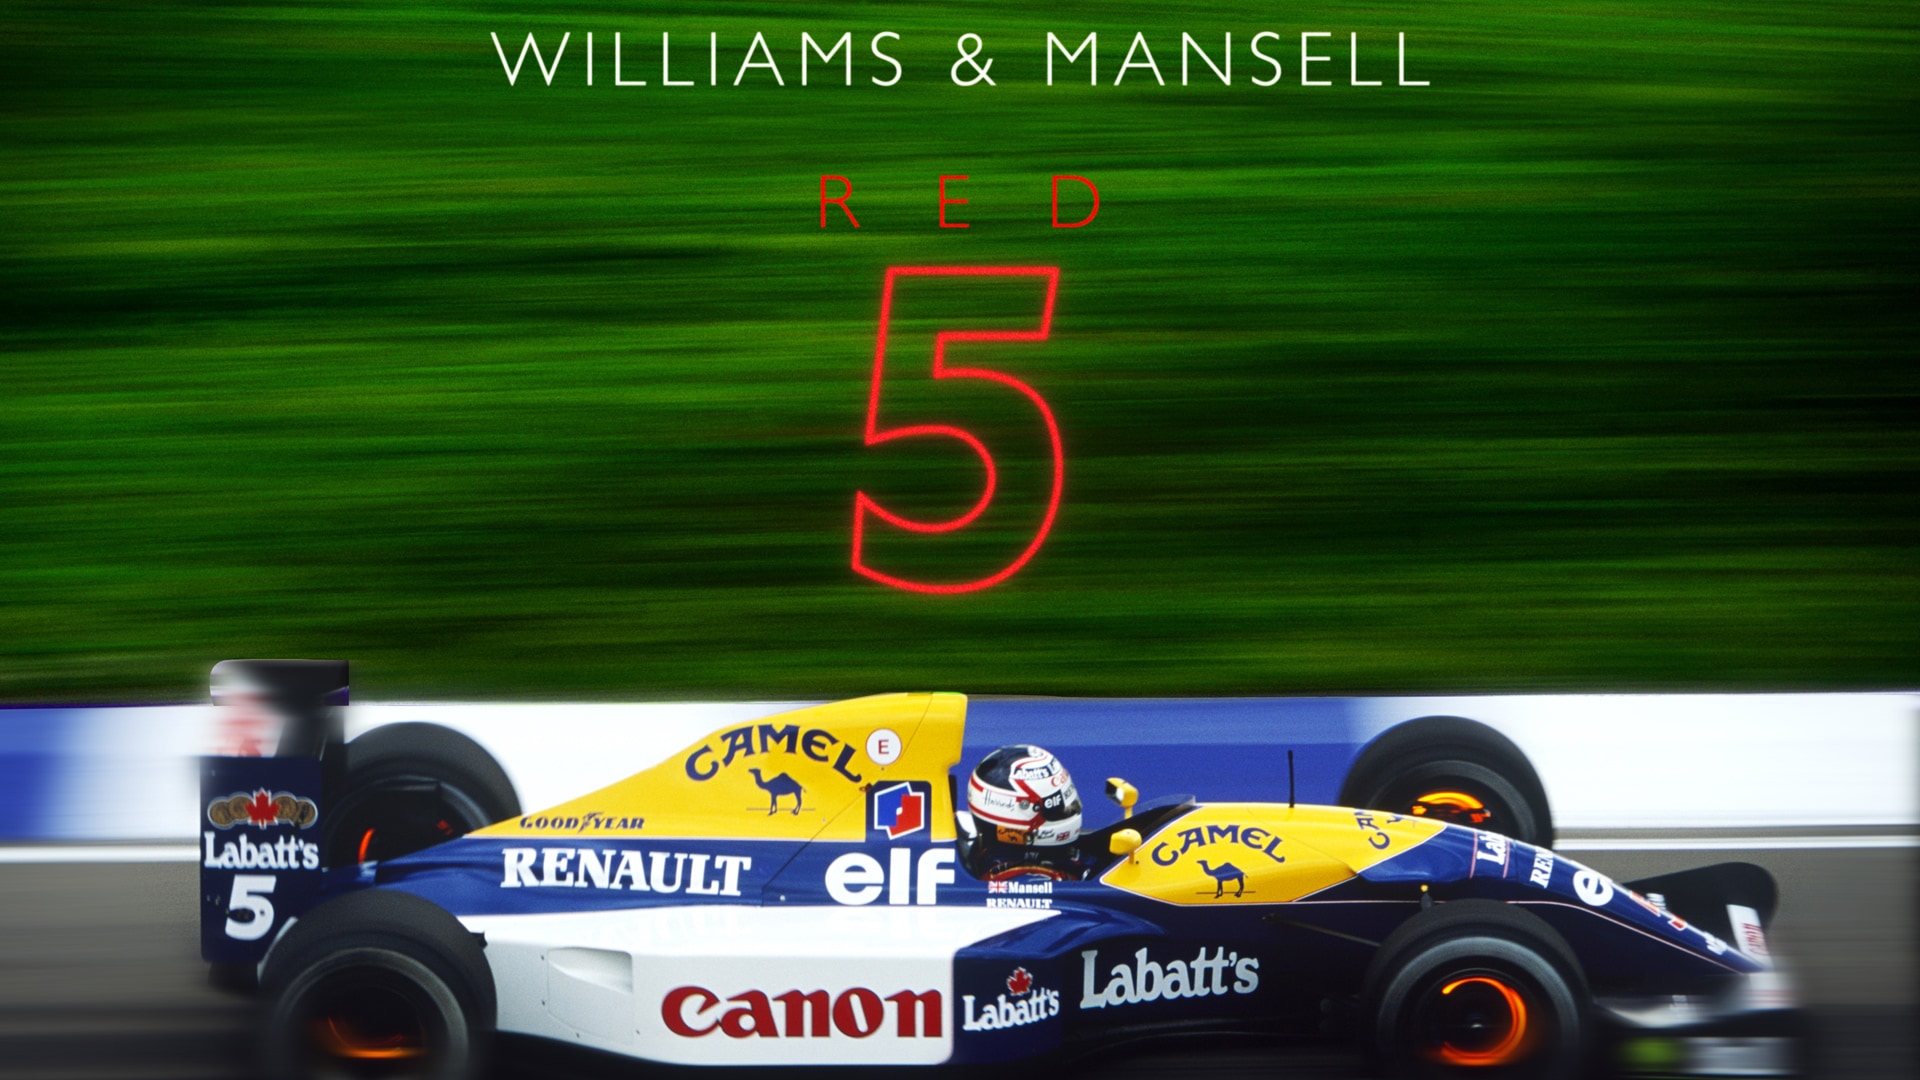 Williams and Mansell